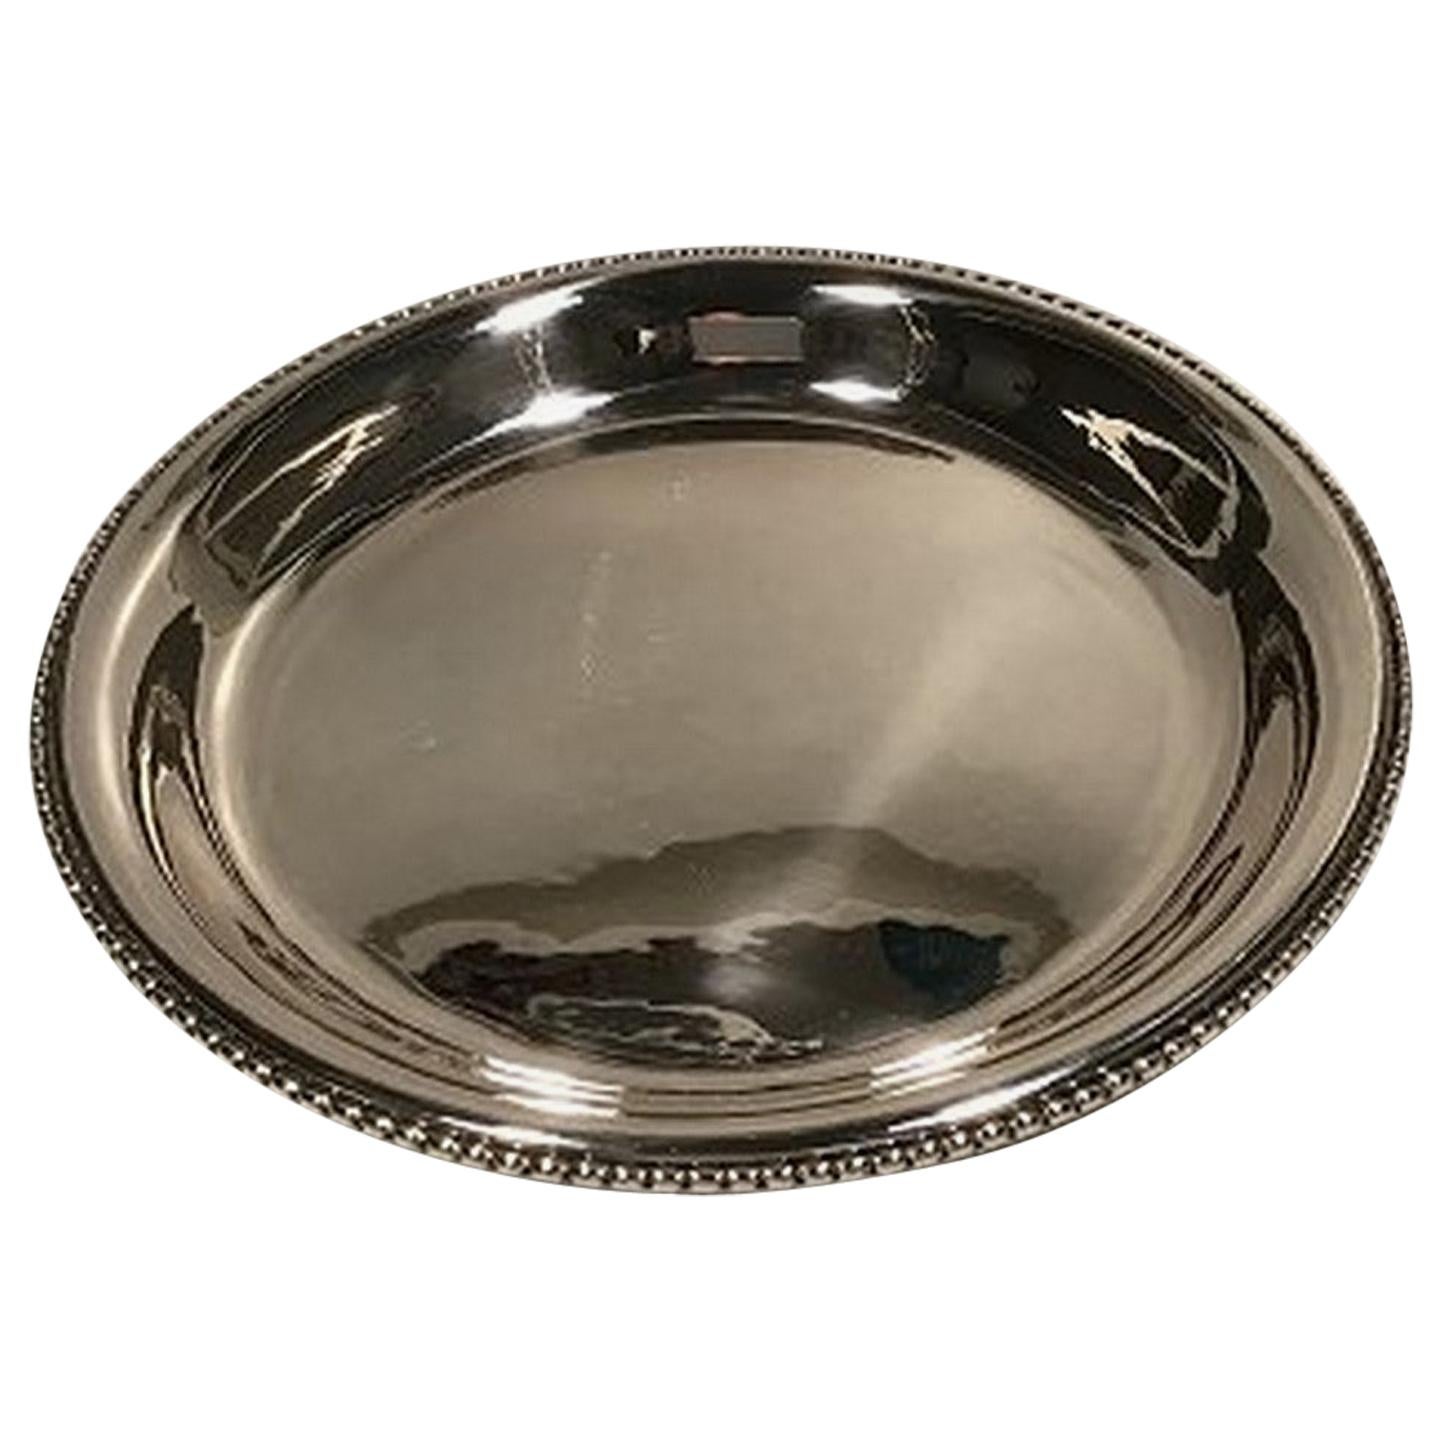 Georg Jensen Silver Tray No. 290, '1919' For Sale